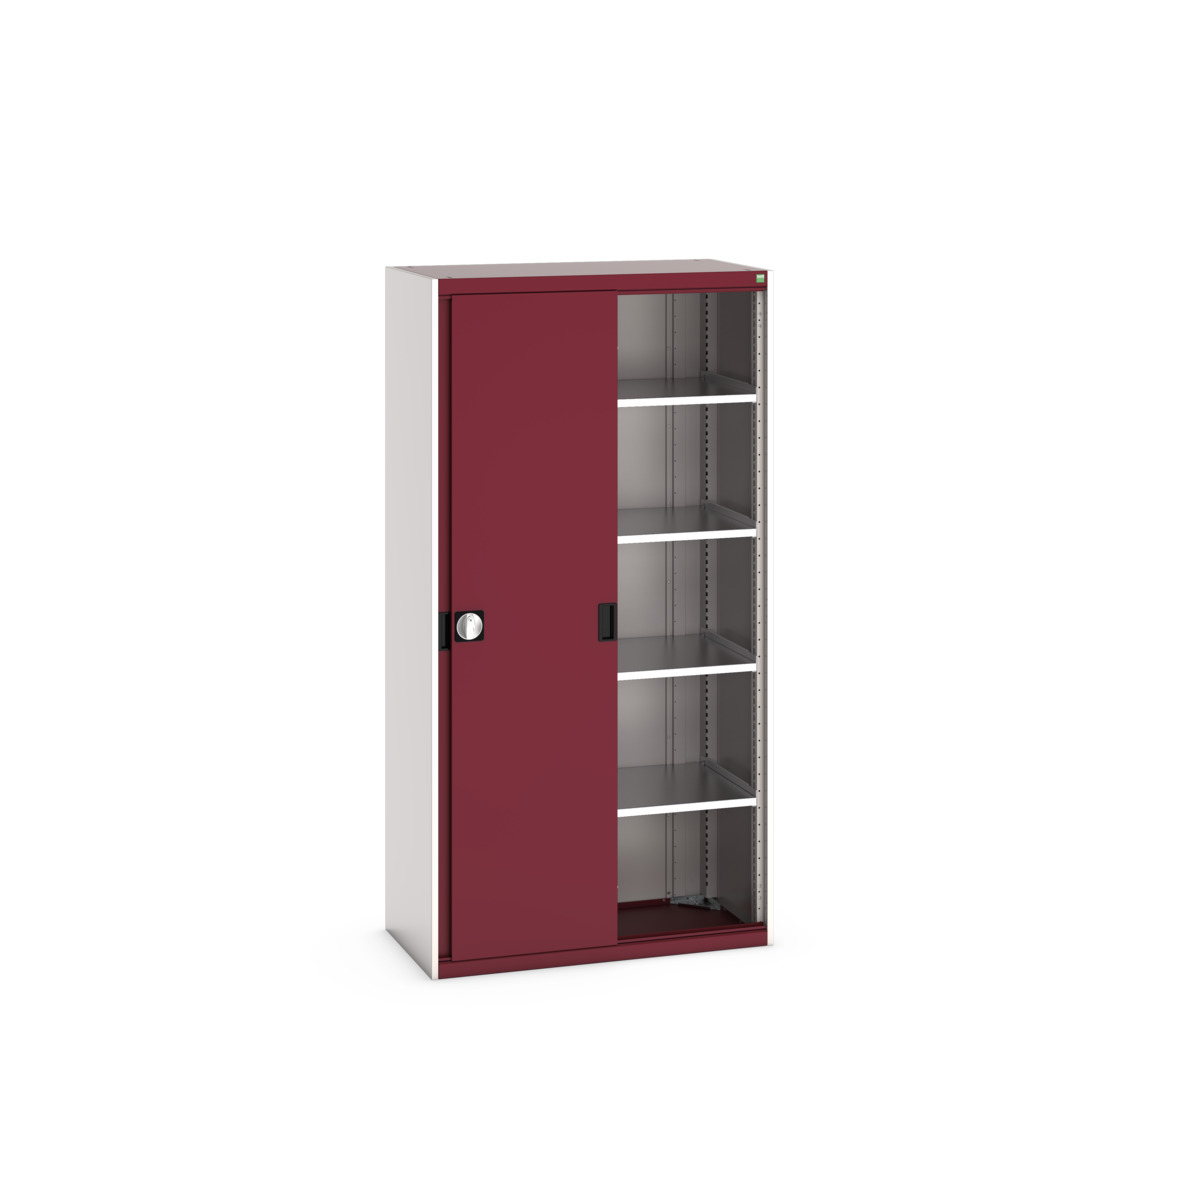 40013071.24V - Armoire Cubio SMS-10520-1.2